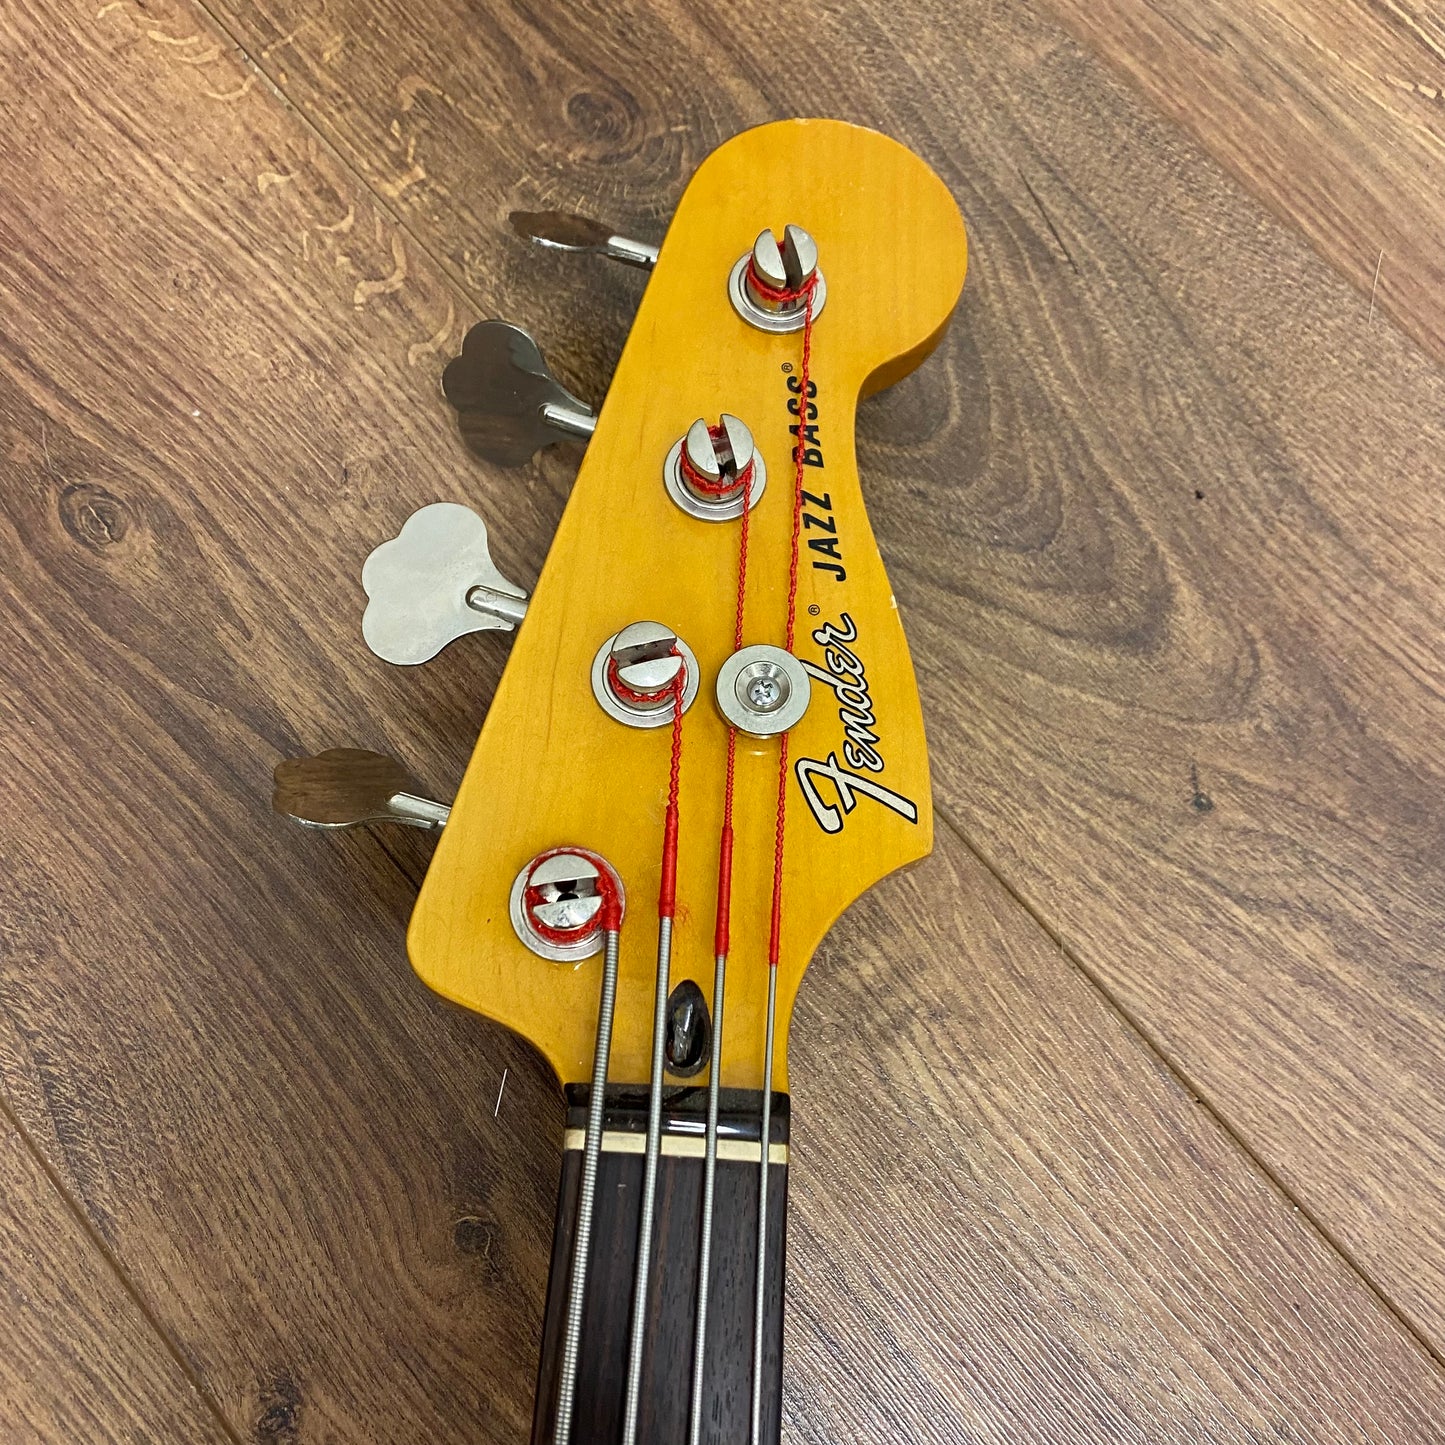 Pre-Owned Fender Modern Player Jazz Bass - Olympic White - 2013